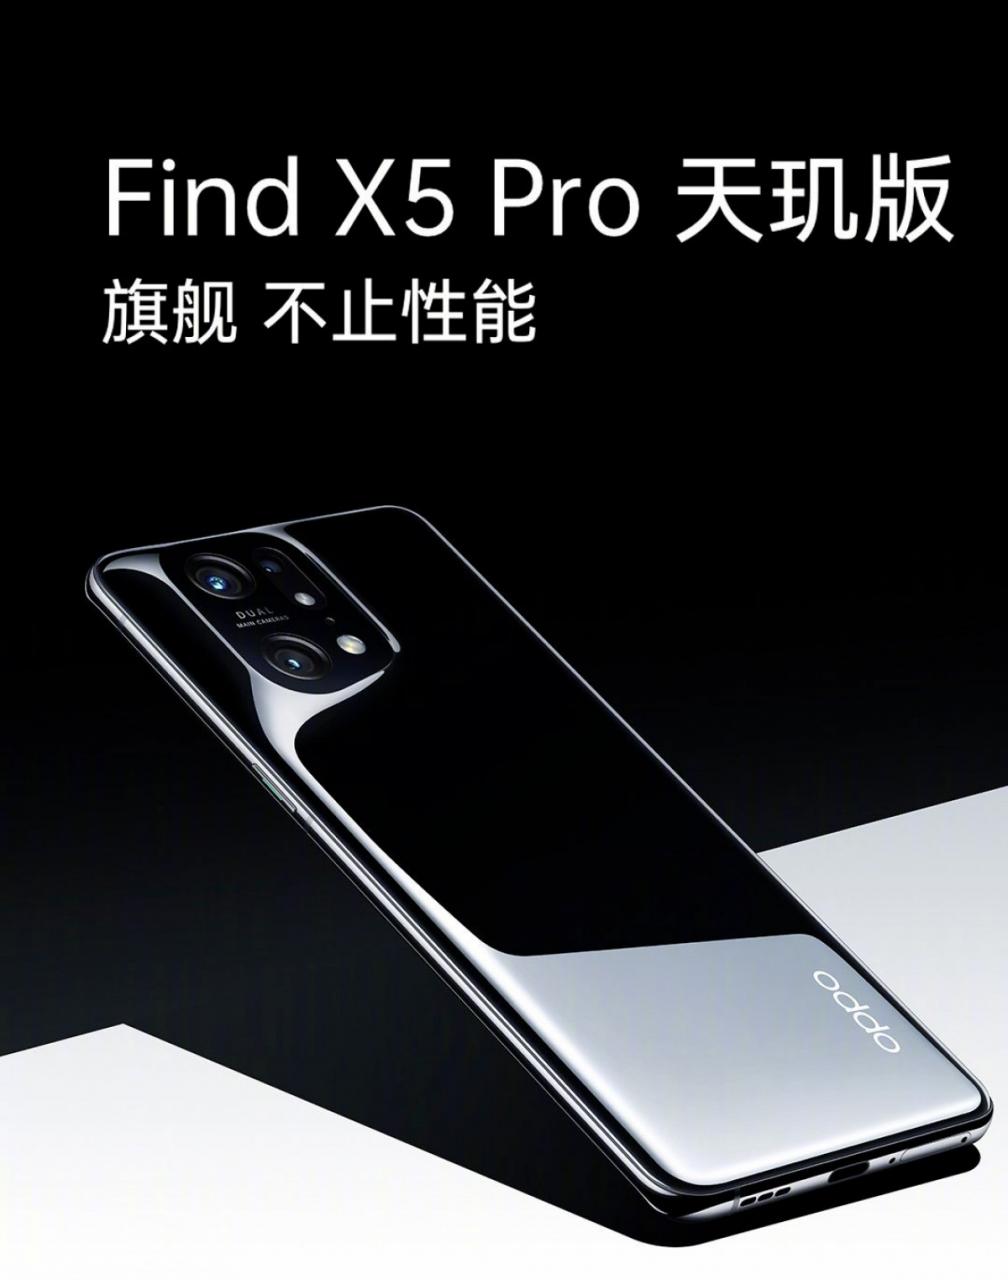 There’s a Dimensity 9000 version of the Oppo Find X5 Pro